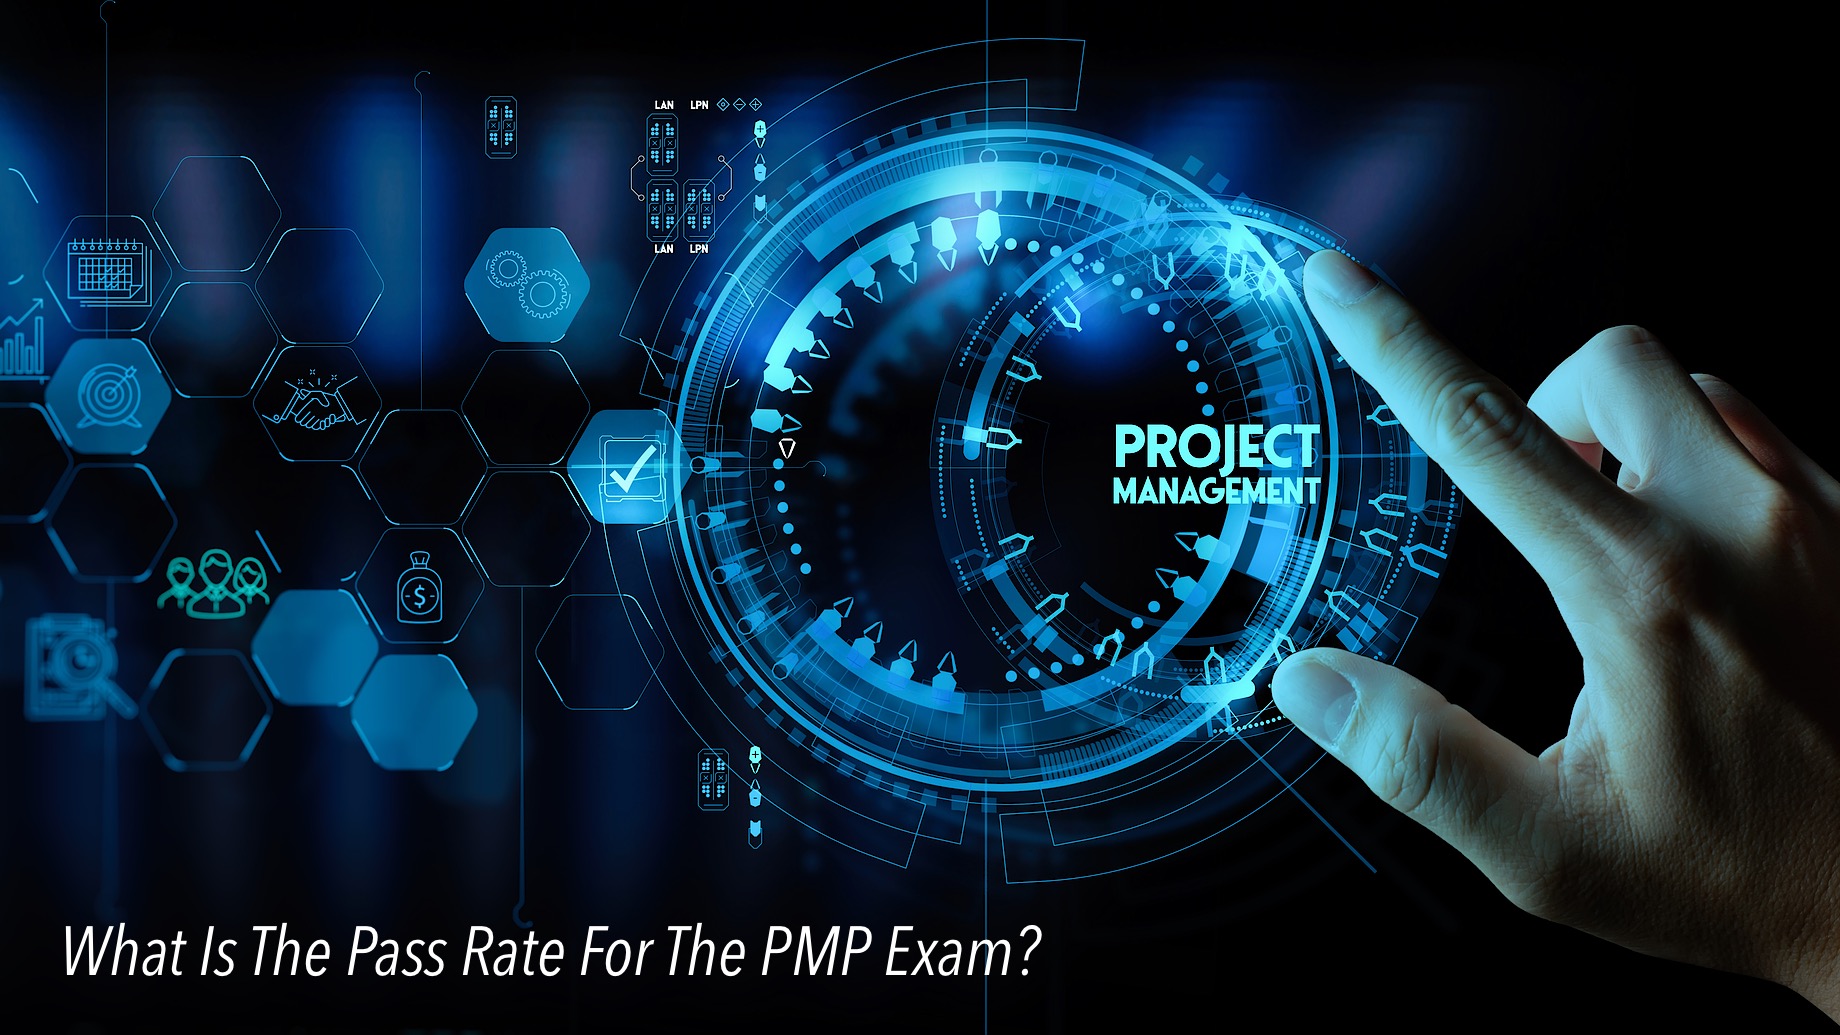 What Is The Pass Rate For The PMP Exam?